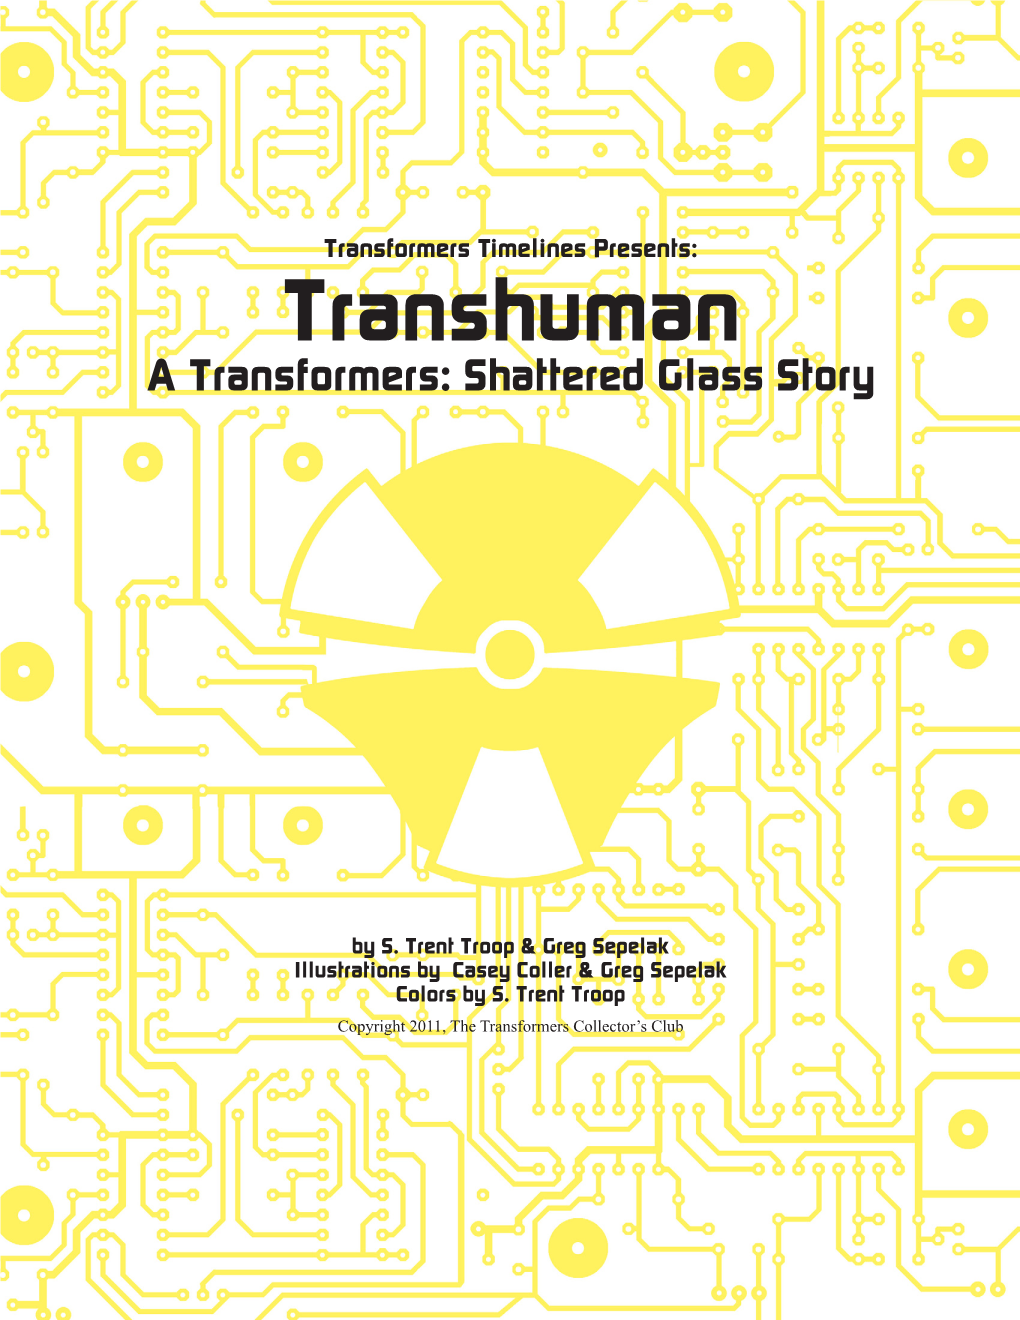 Transhuman a Transformers: Shattered Glass Story